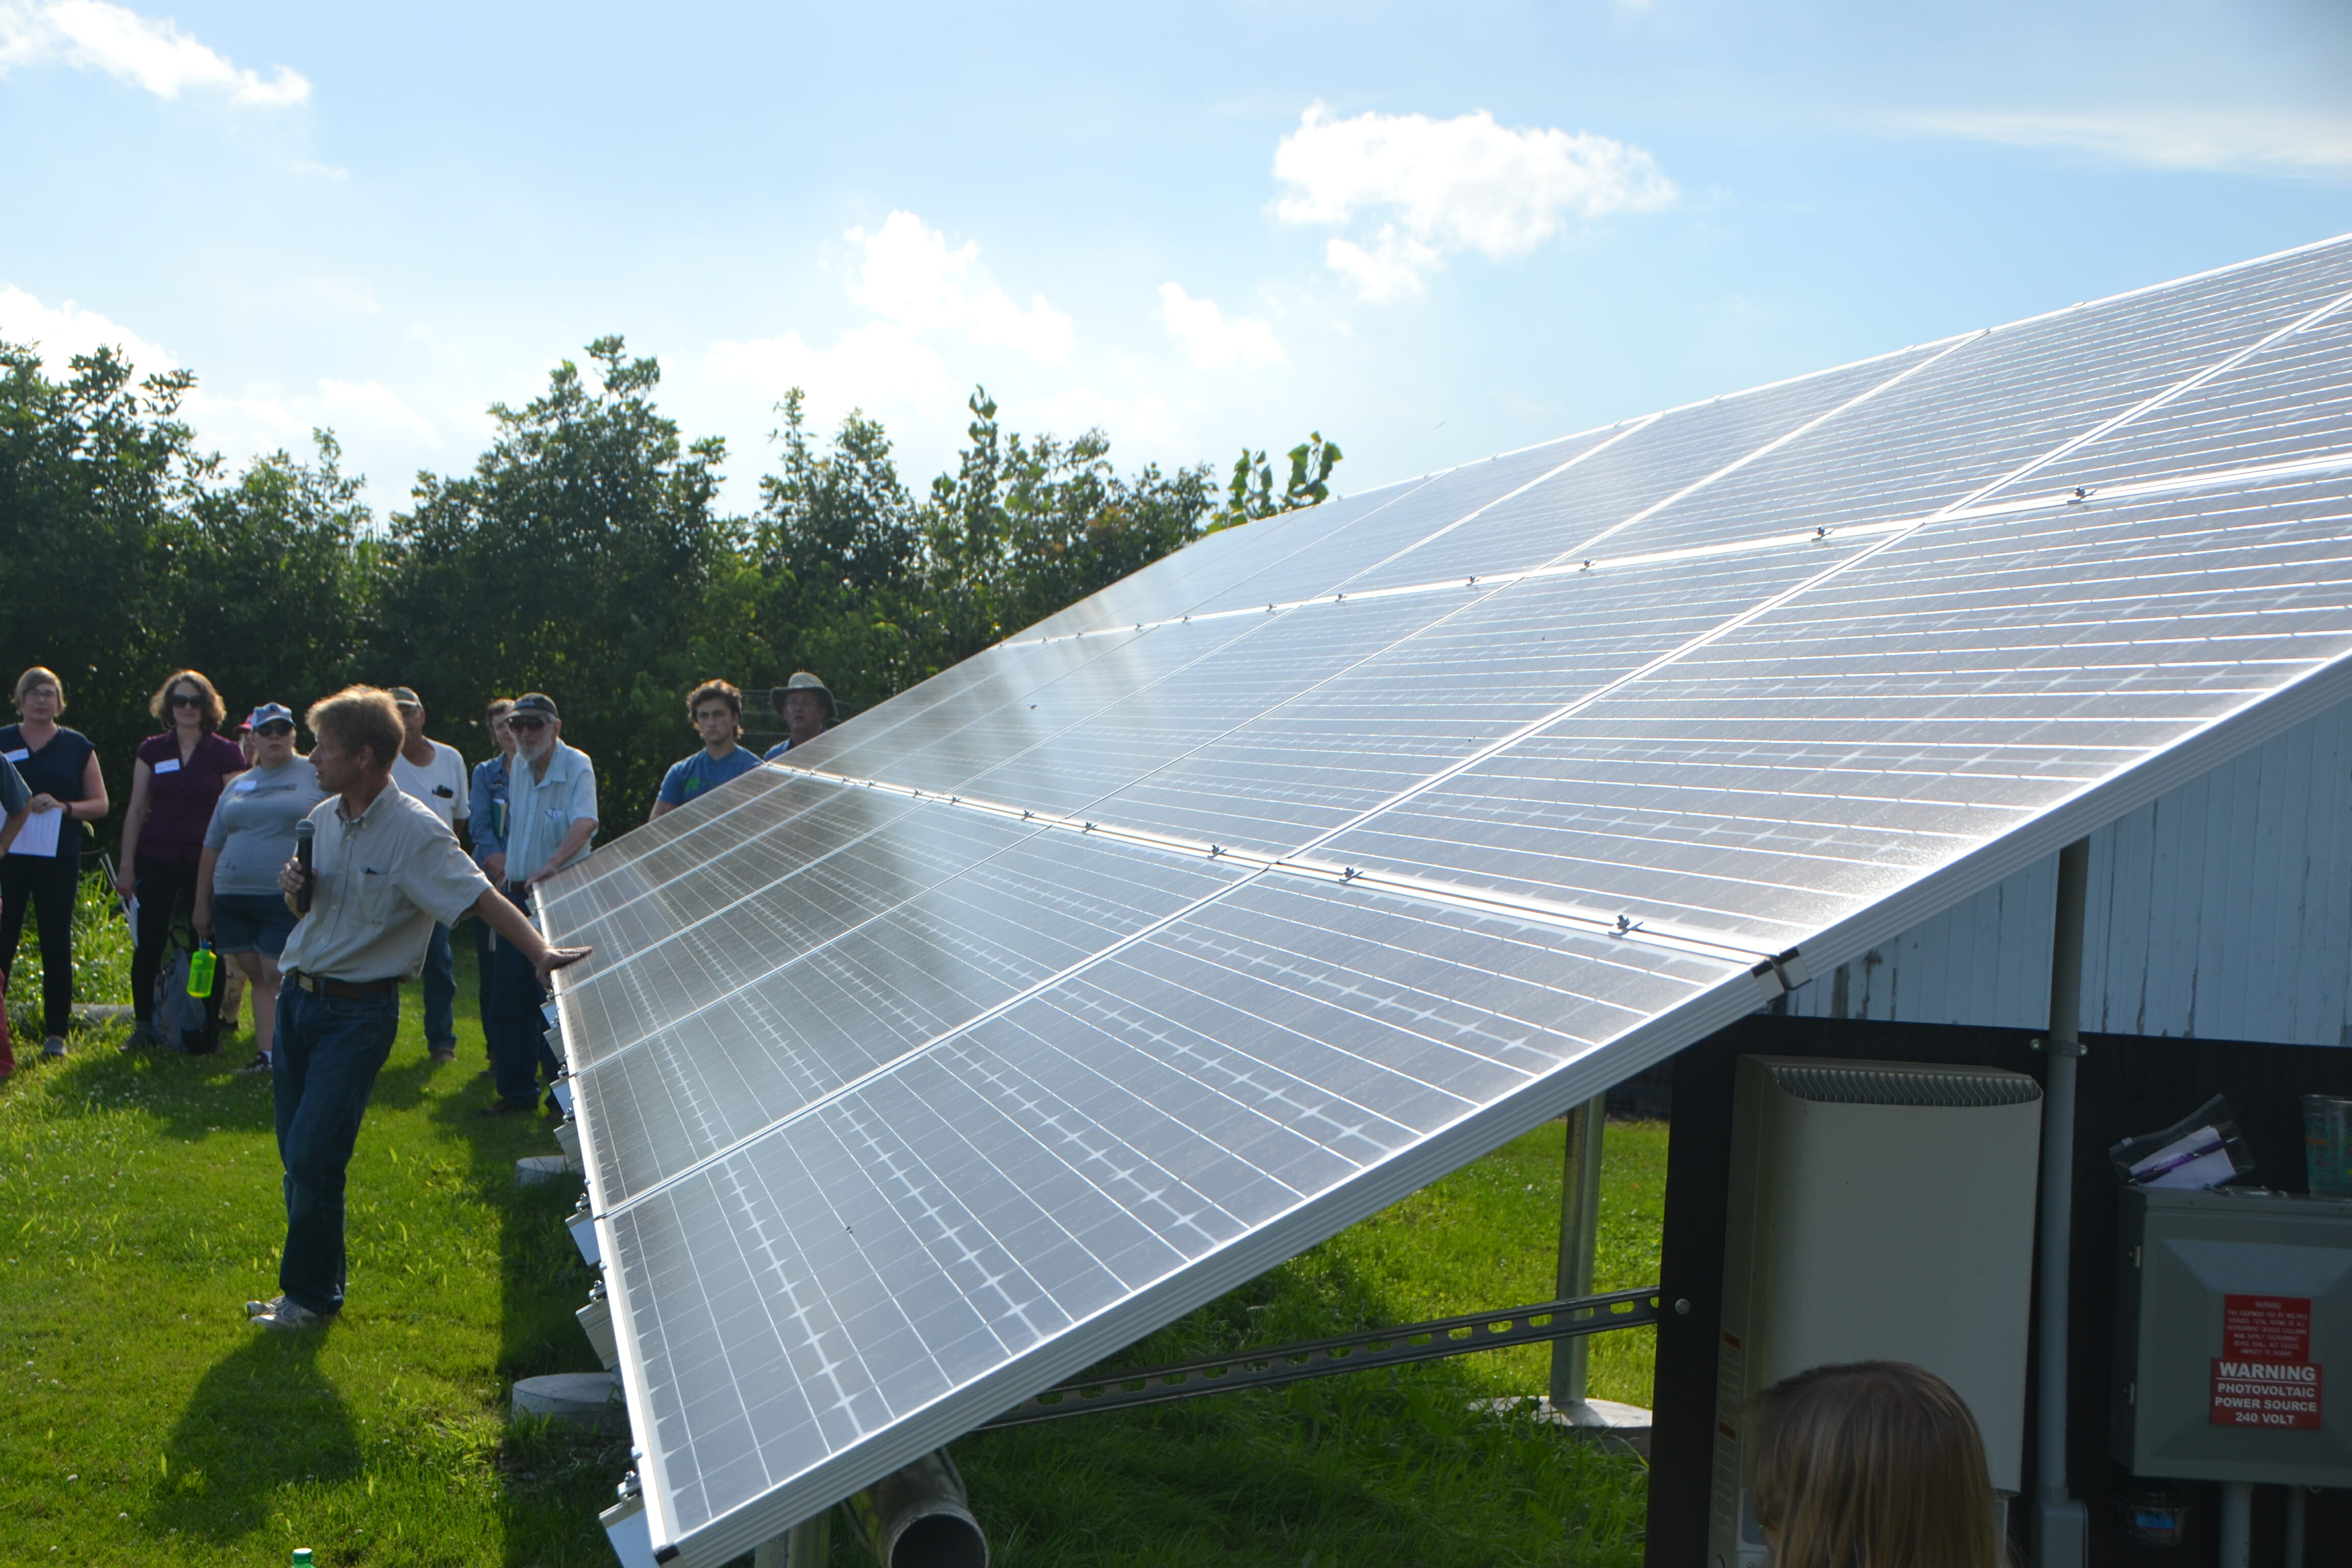 Todd Hammen, of Iowa Energy Alternatives, with one of Lees photovoltaic solar arrays.